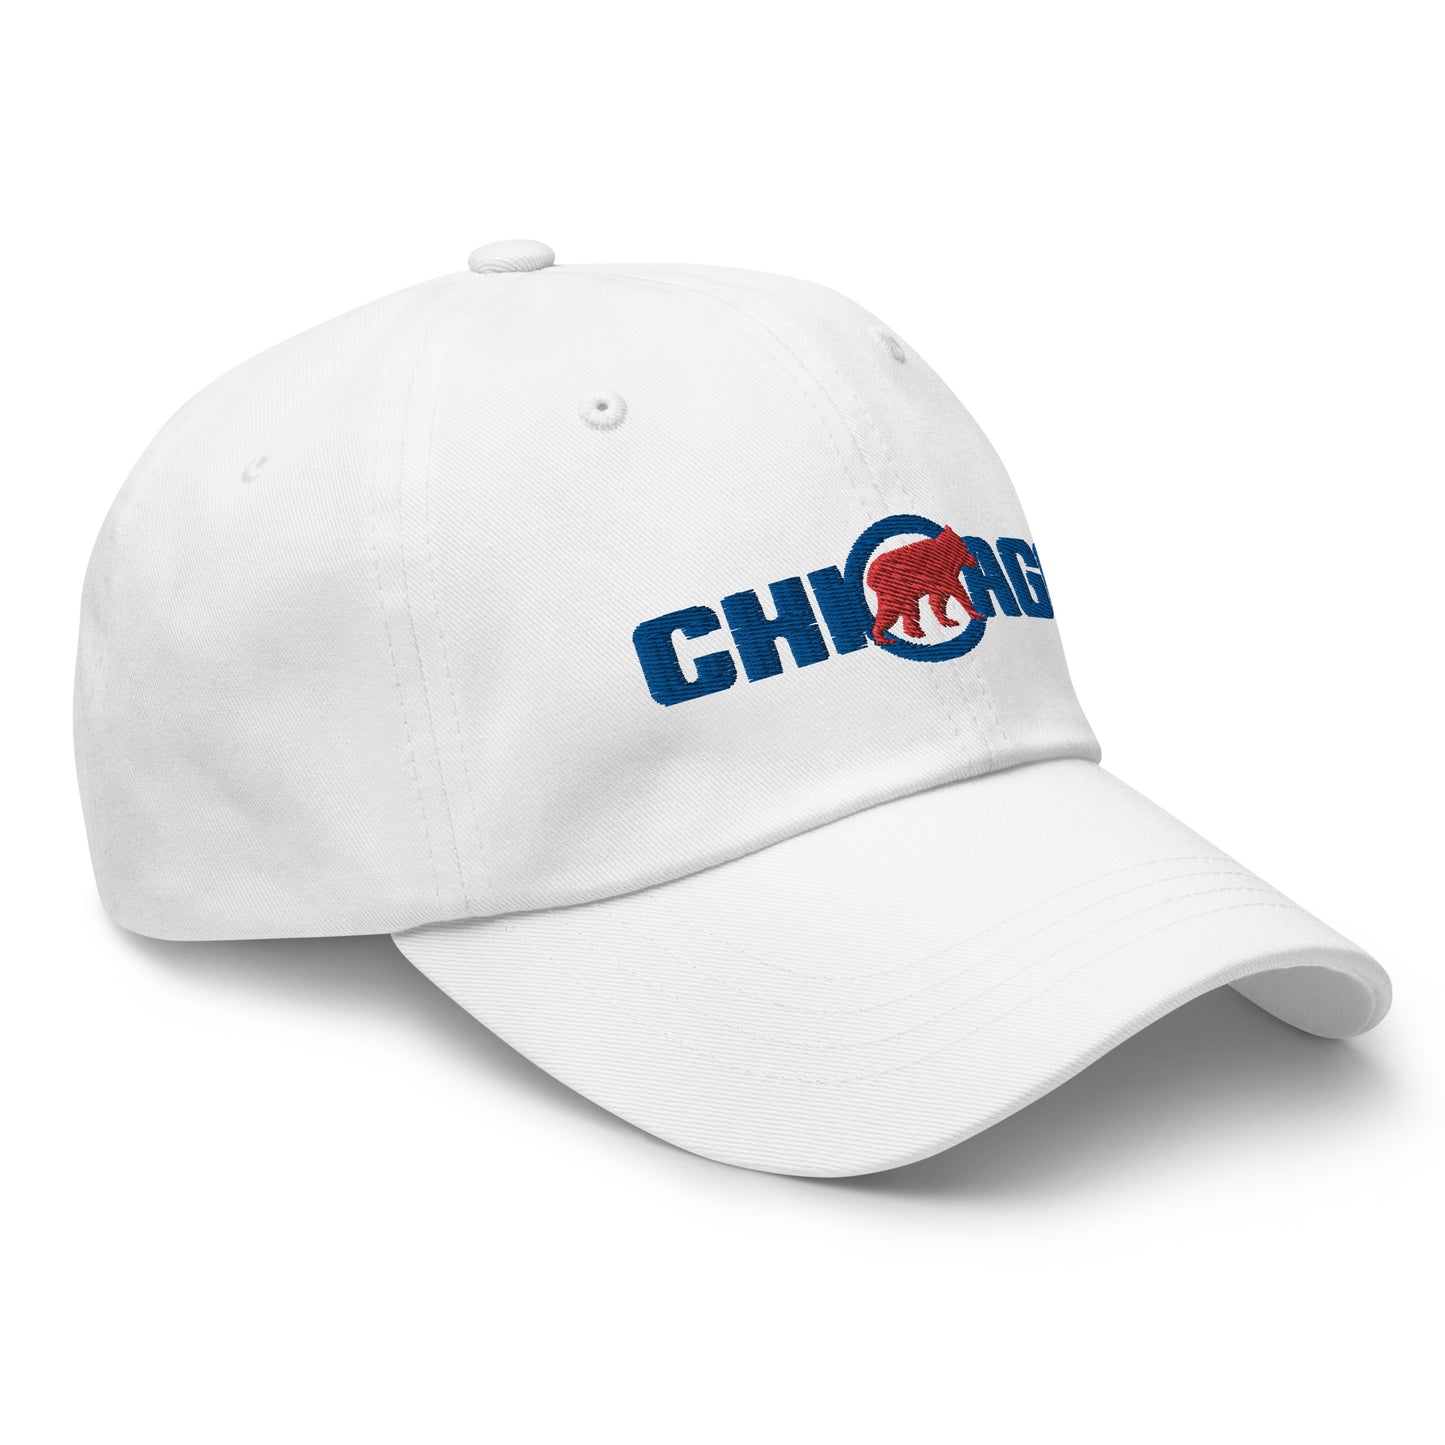 Chicago Cubs - Championship Edition Dad hat